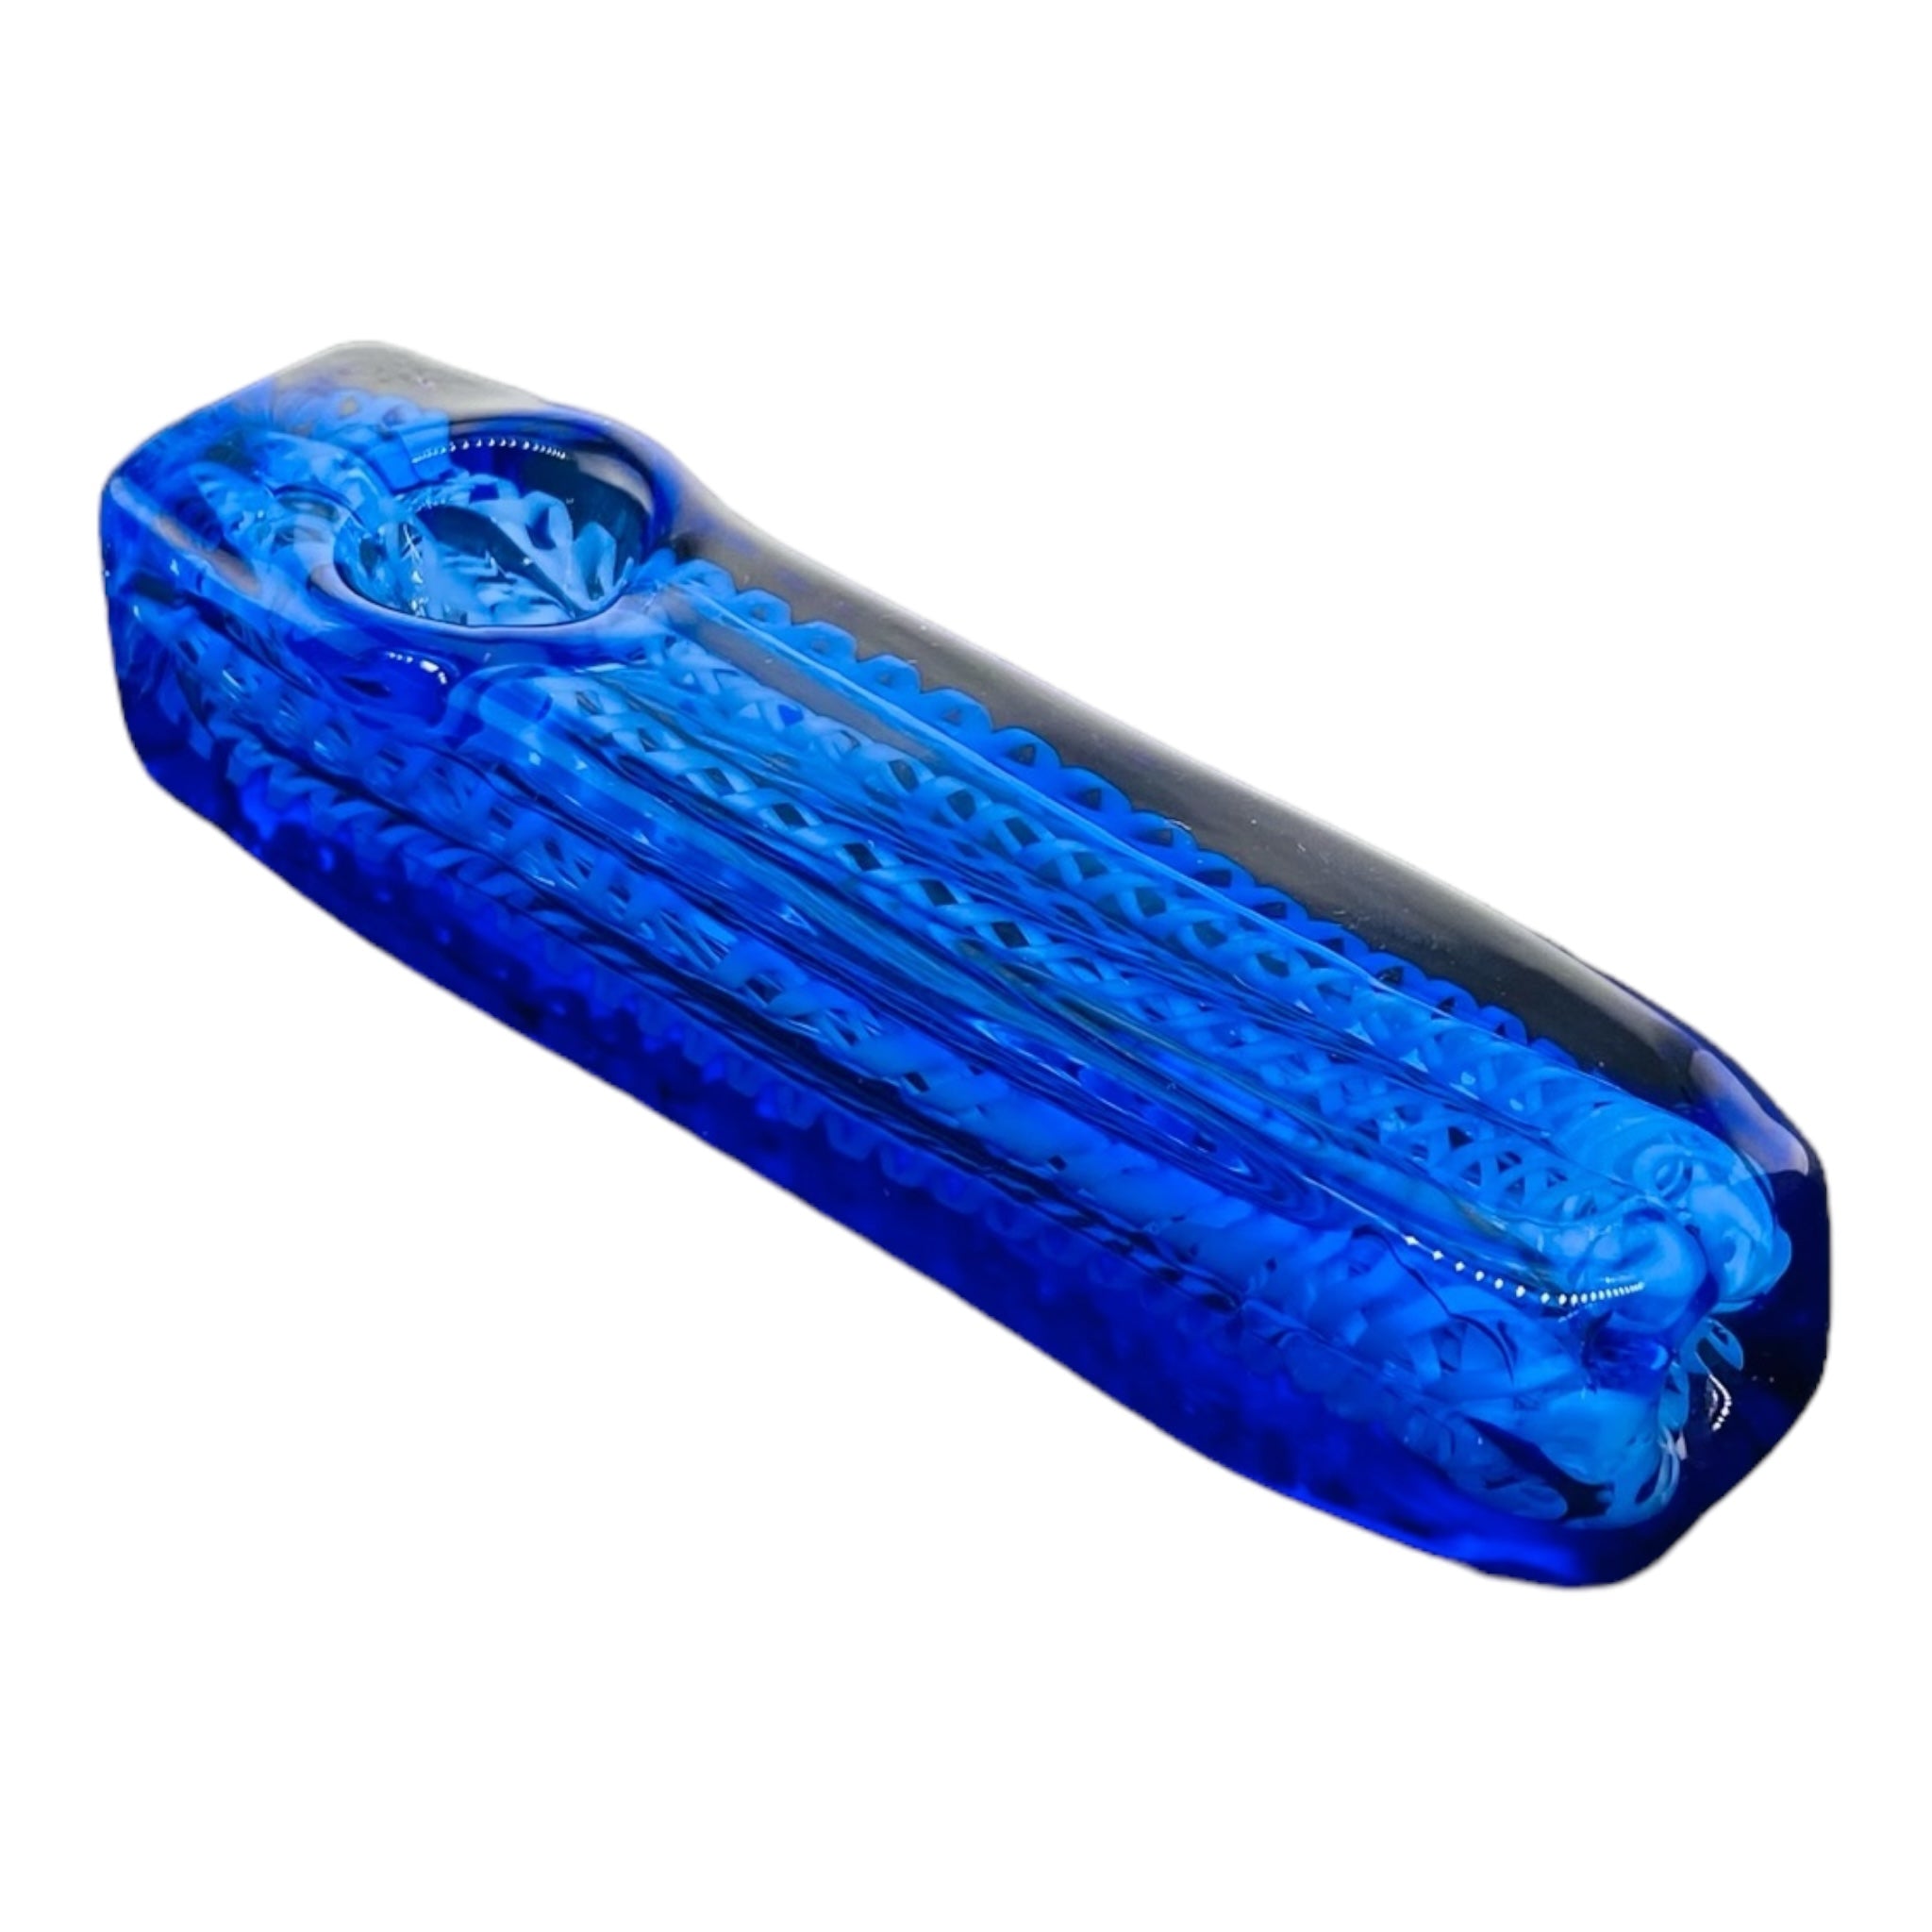 Glass Hand Pipes - Blue And White Linework Twist Rectangle Glass Hand Pipe